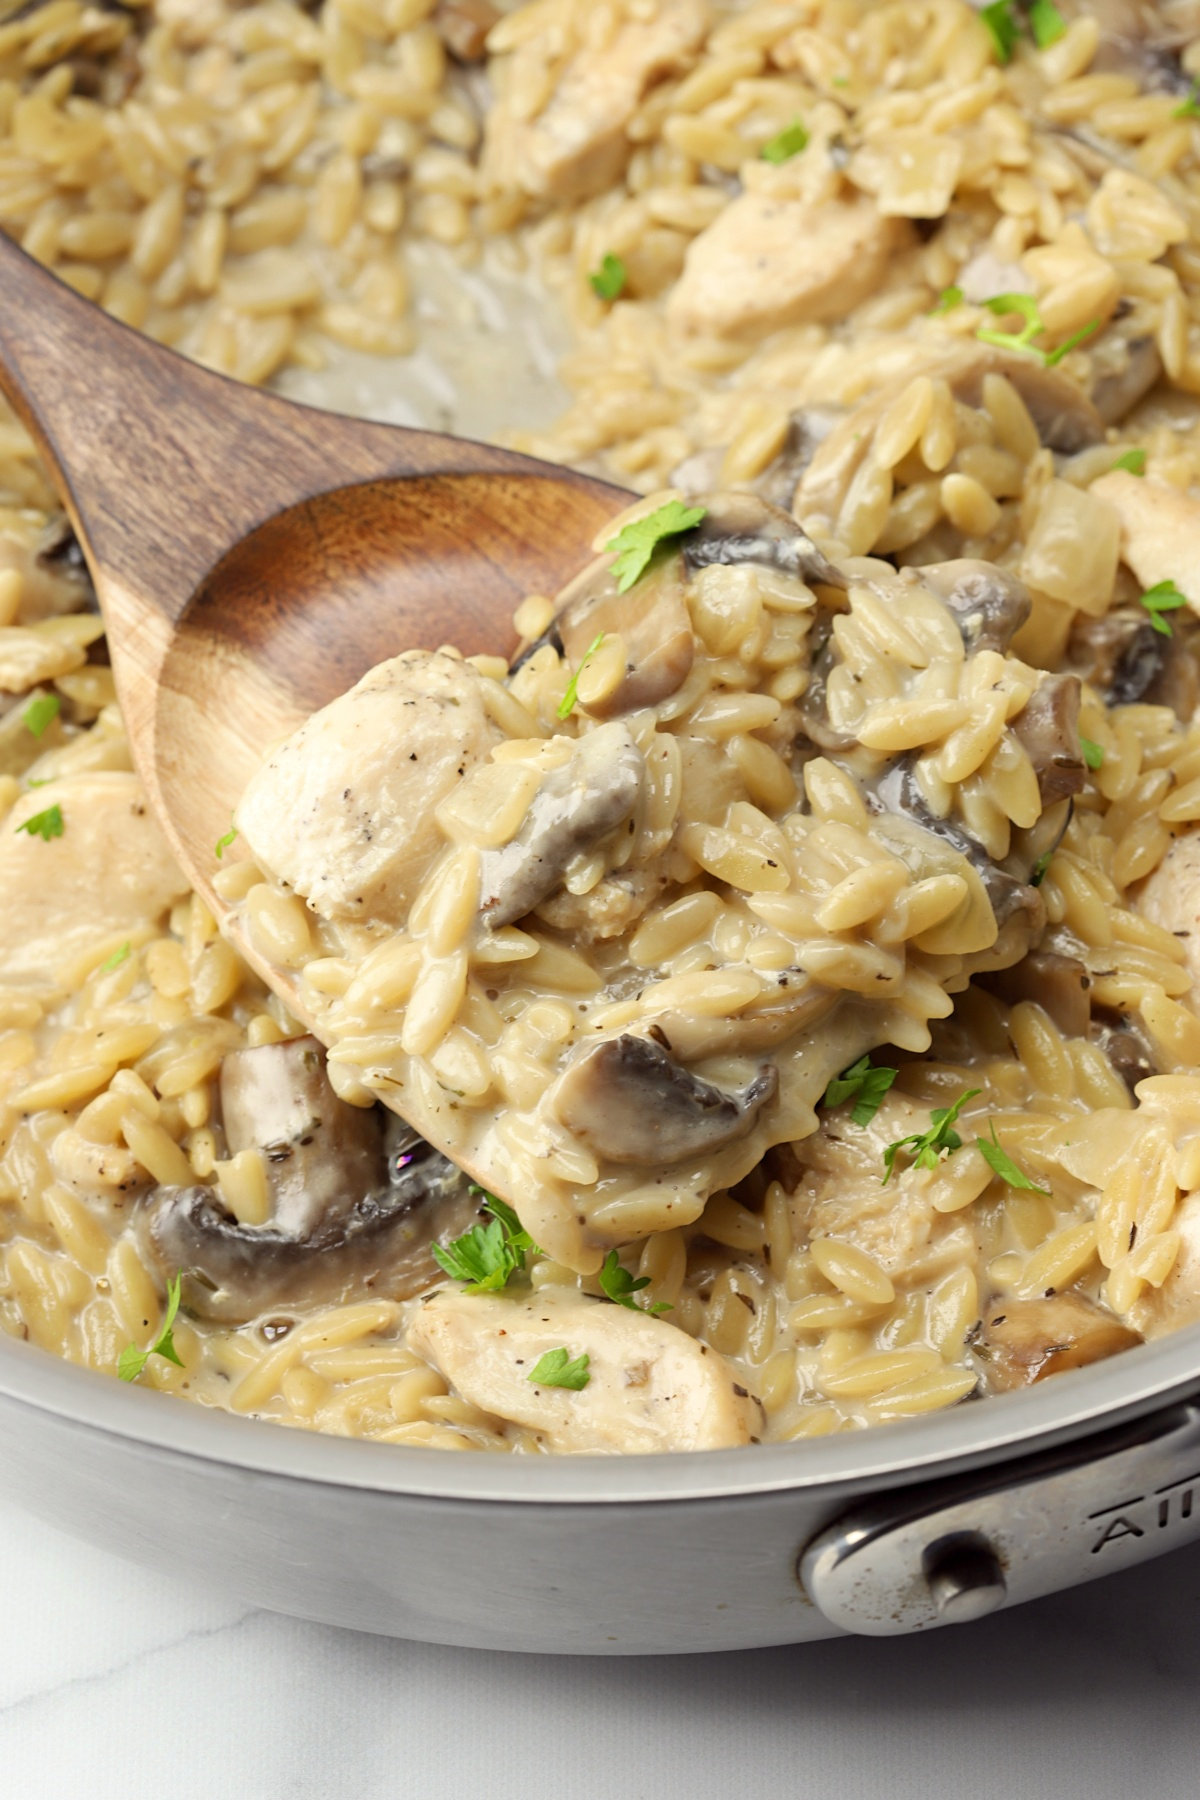 Orzo, chicken, and mushrooms in a creamy sauce.